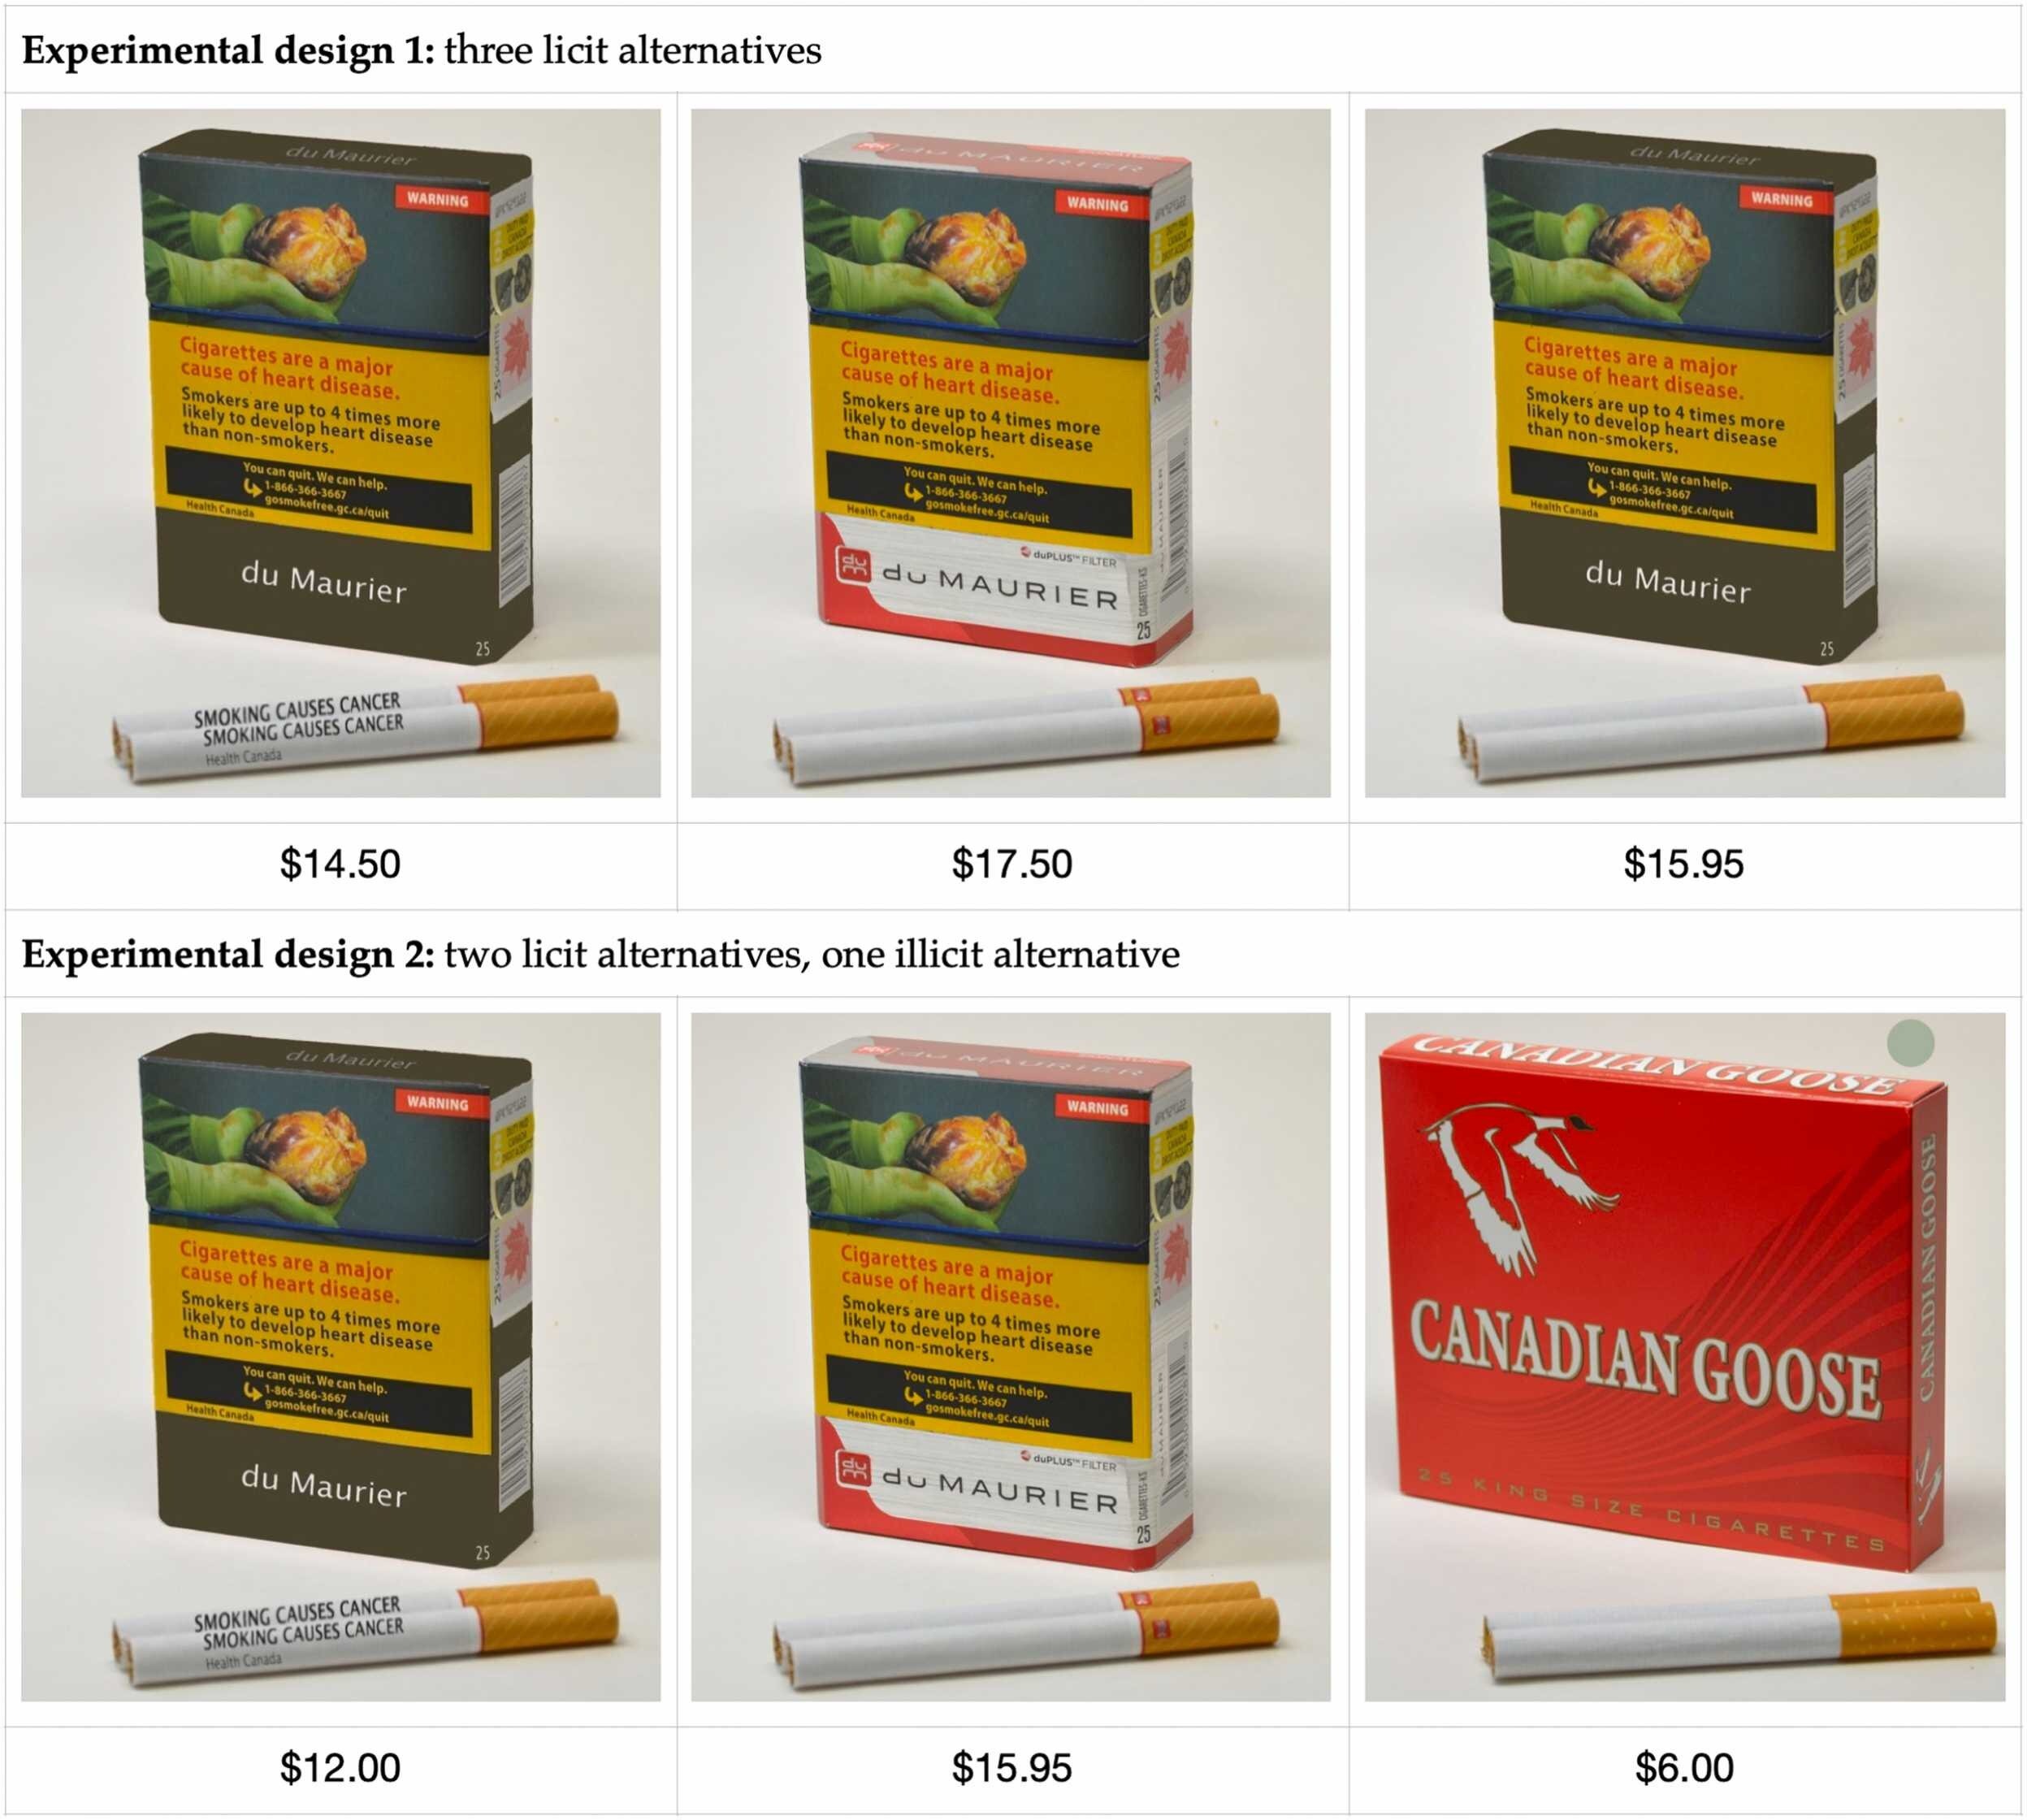 Study finds price is main factor in cigarette choice among Canadian smokers